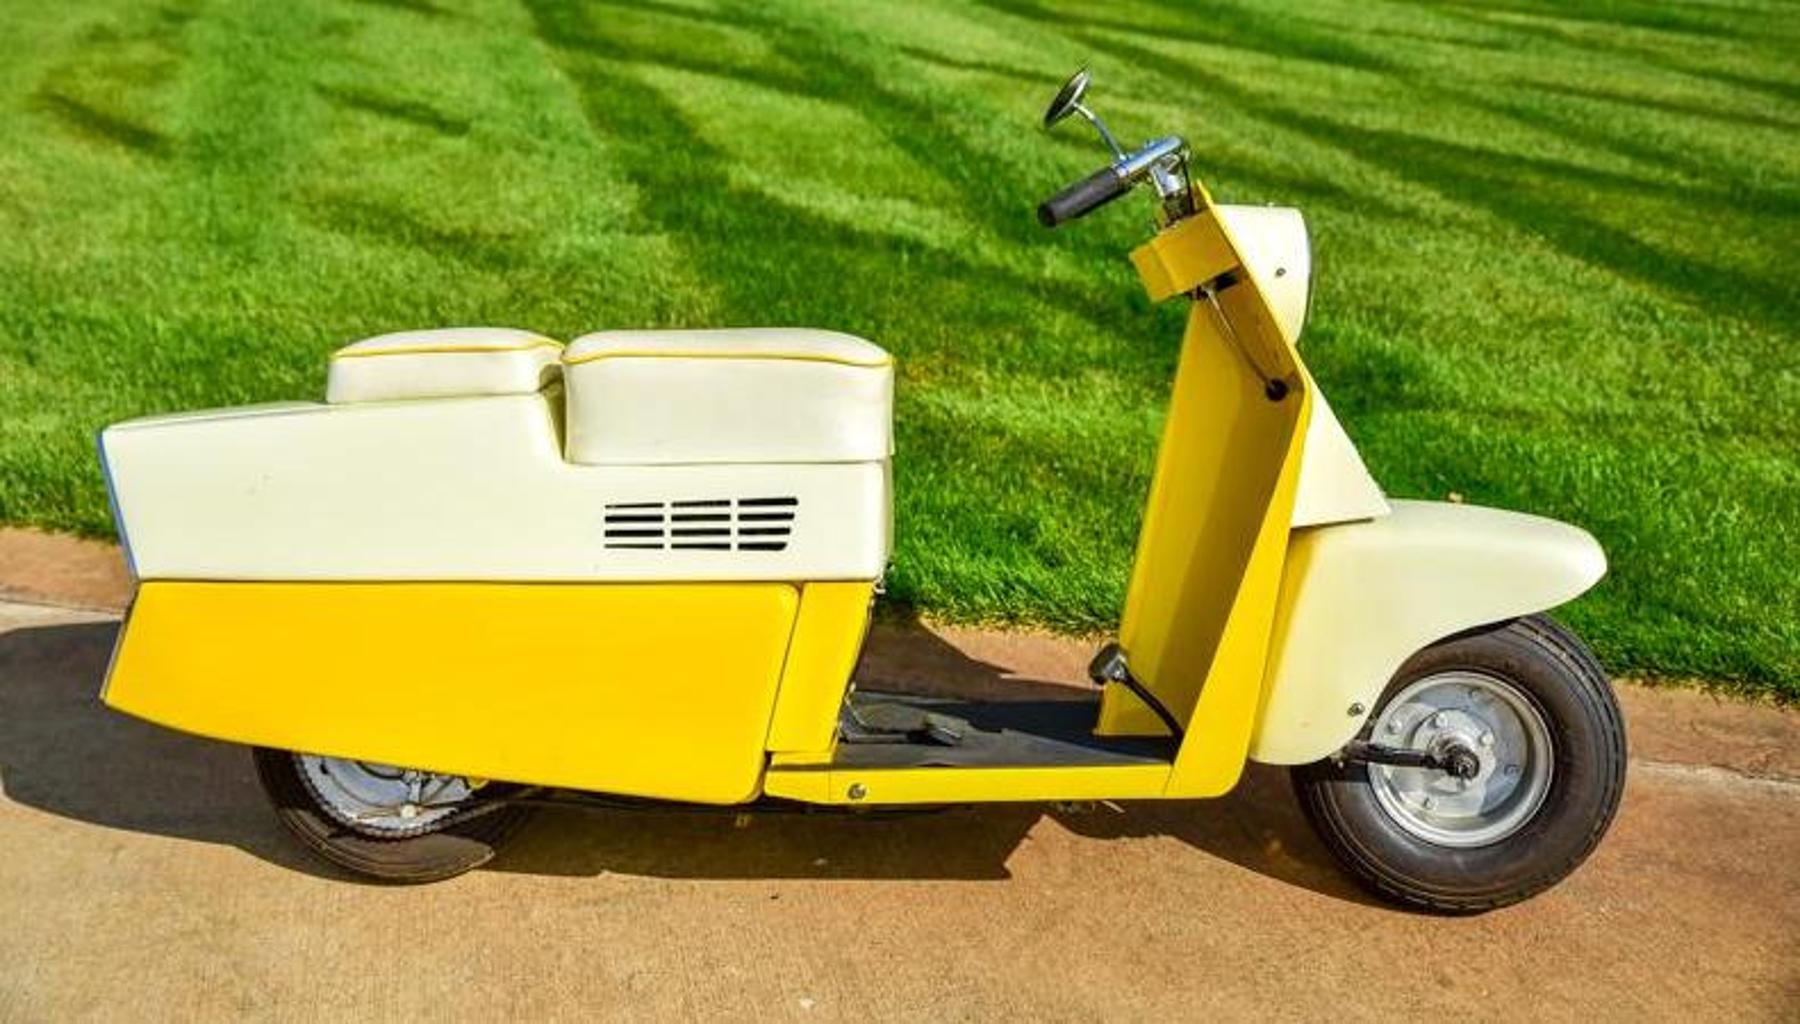 1959 Cushman Scooter and 1972 Honda Trail CT70